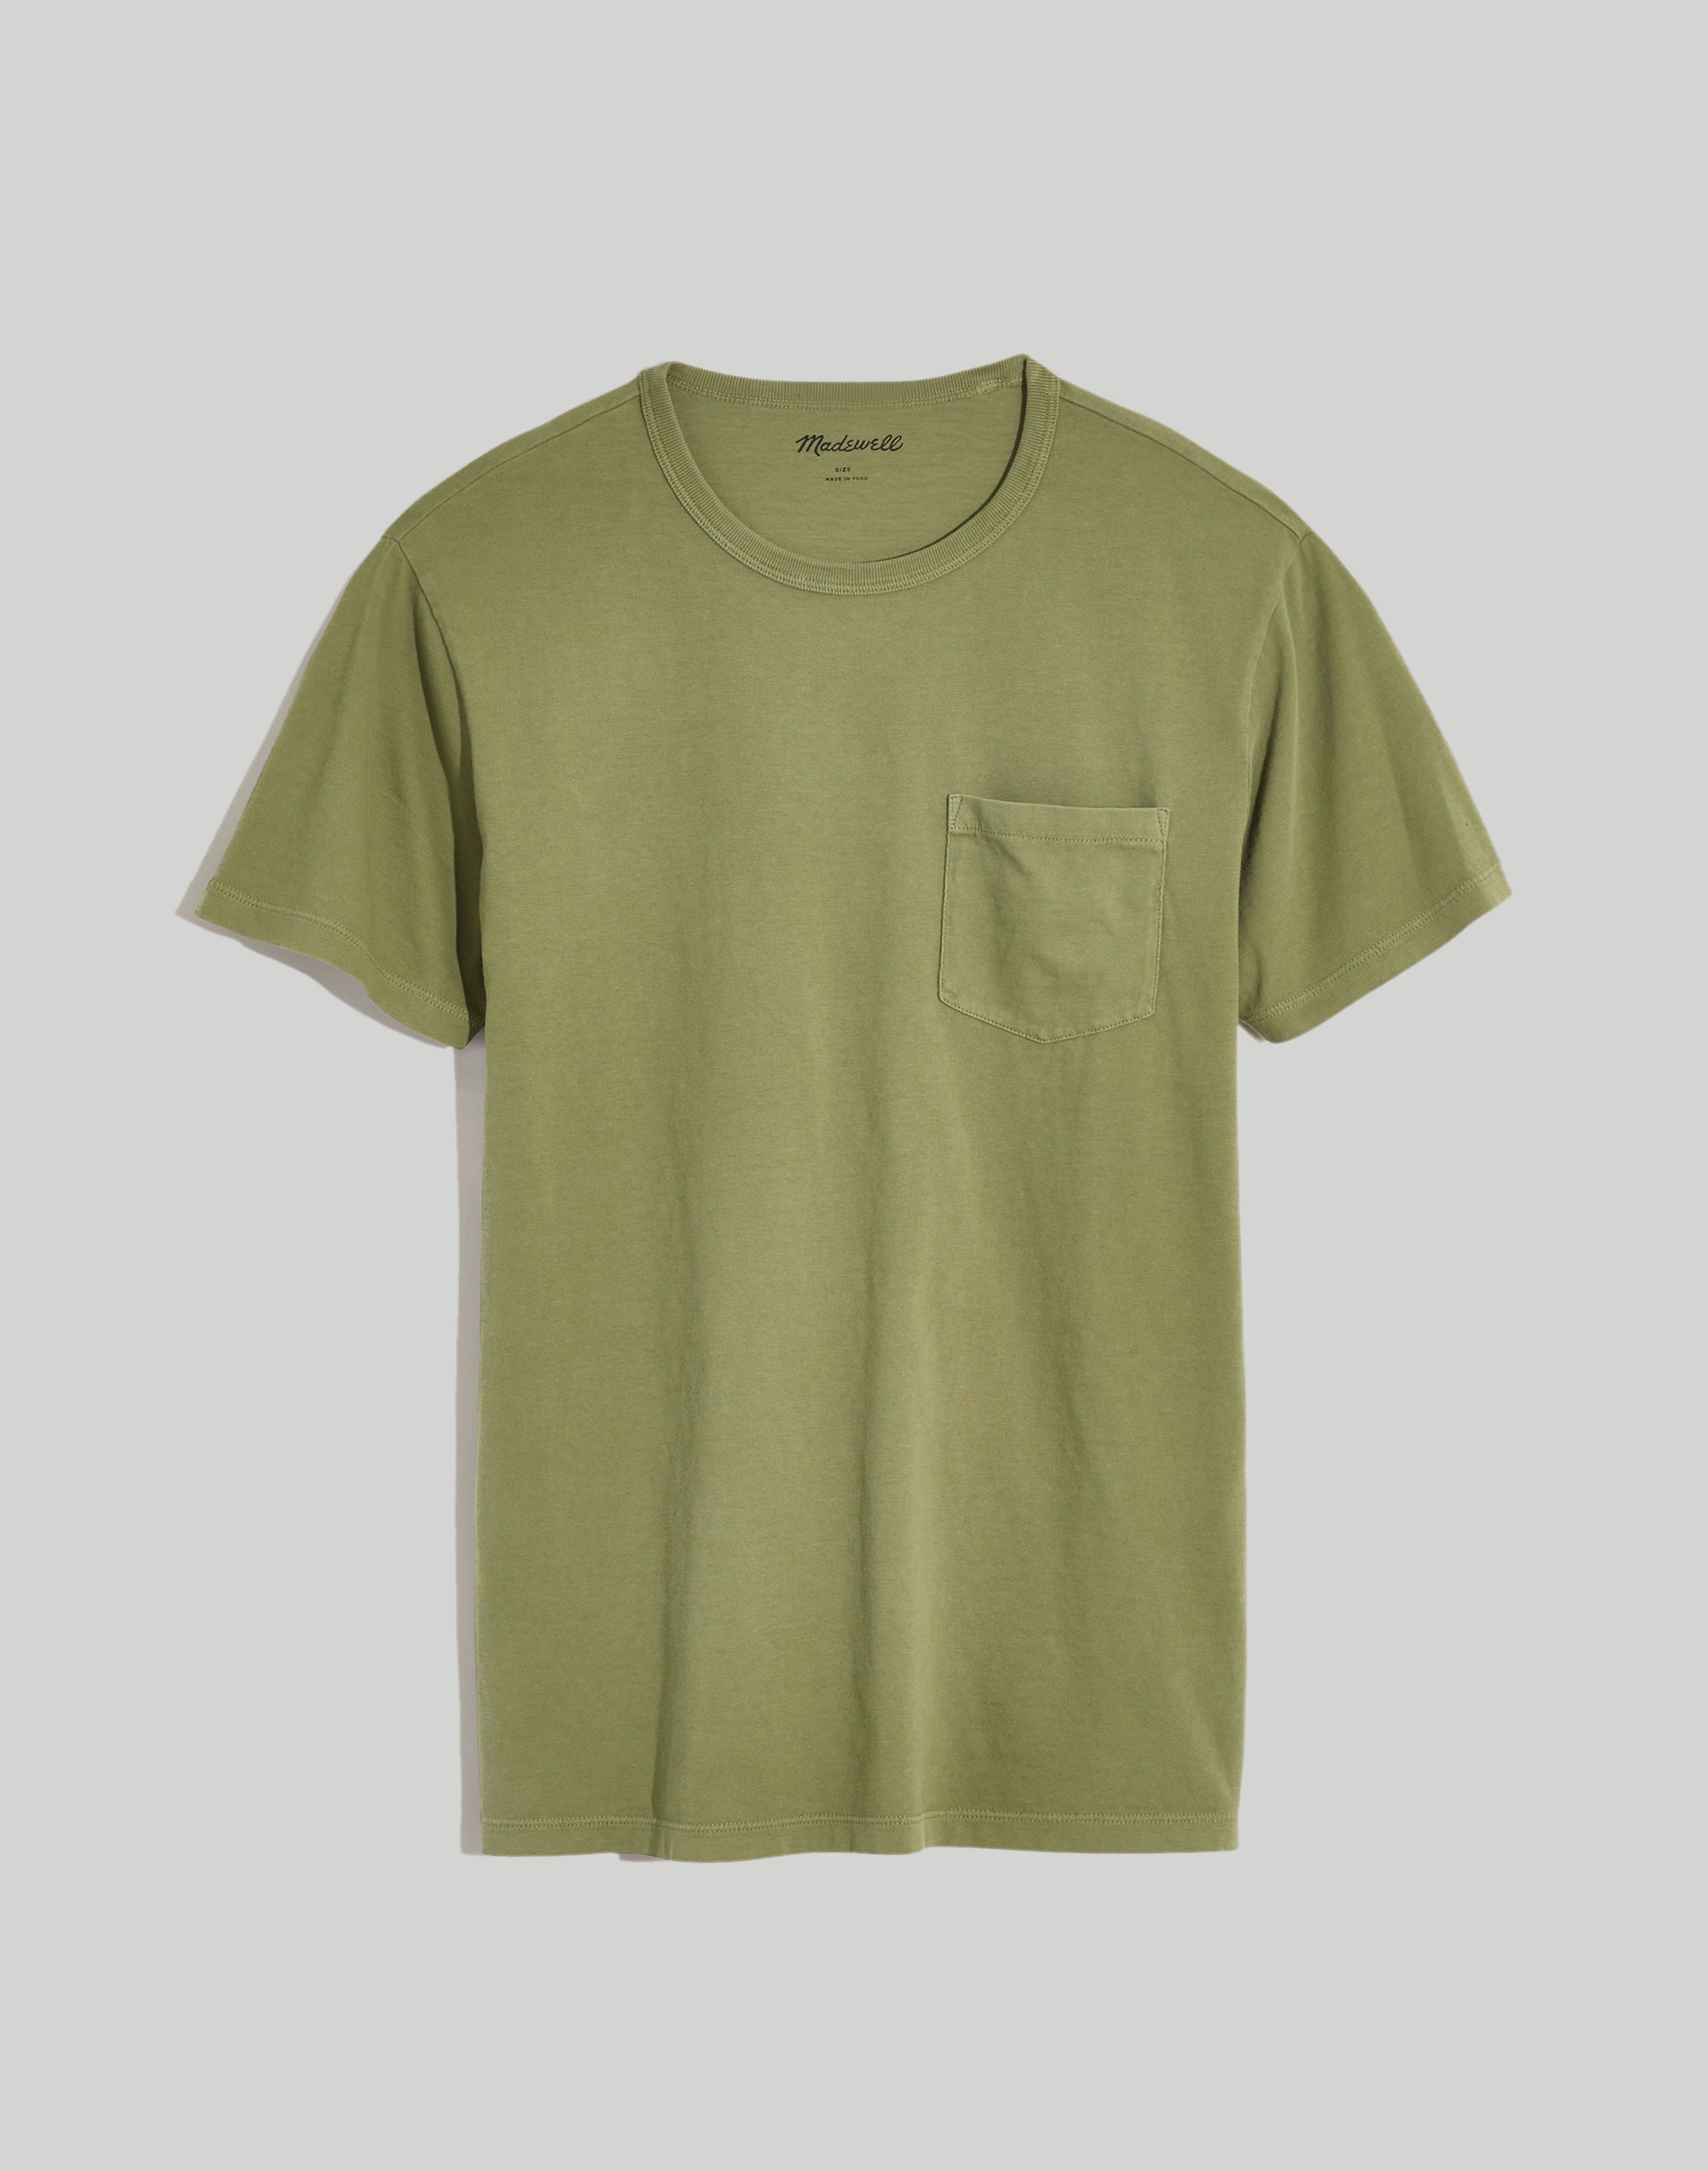 Mw Garment-dyed Allday Crewneck Pocket Tee In Faded Palm